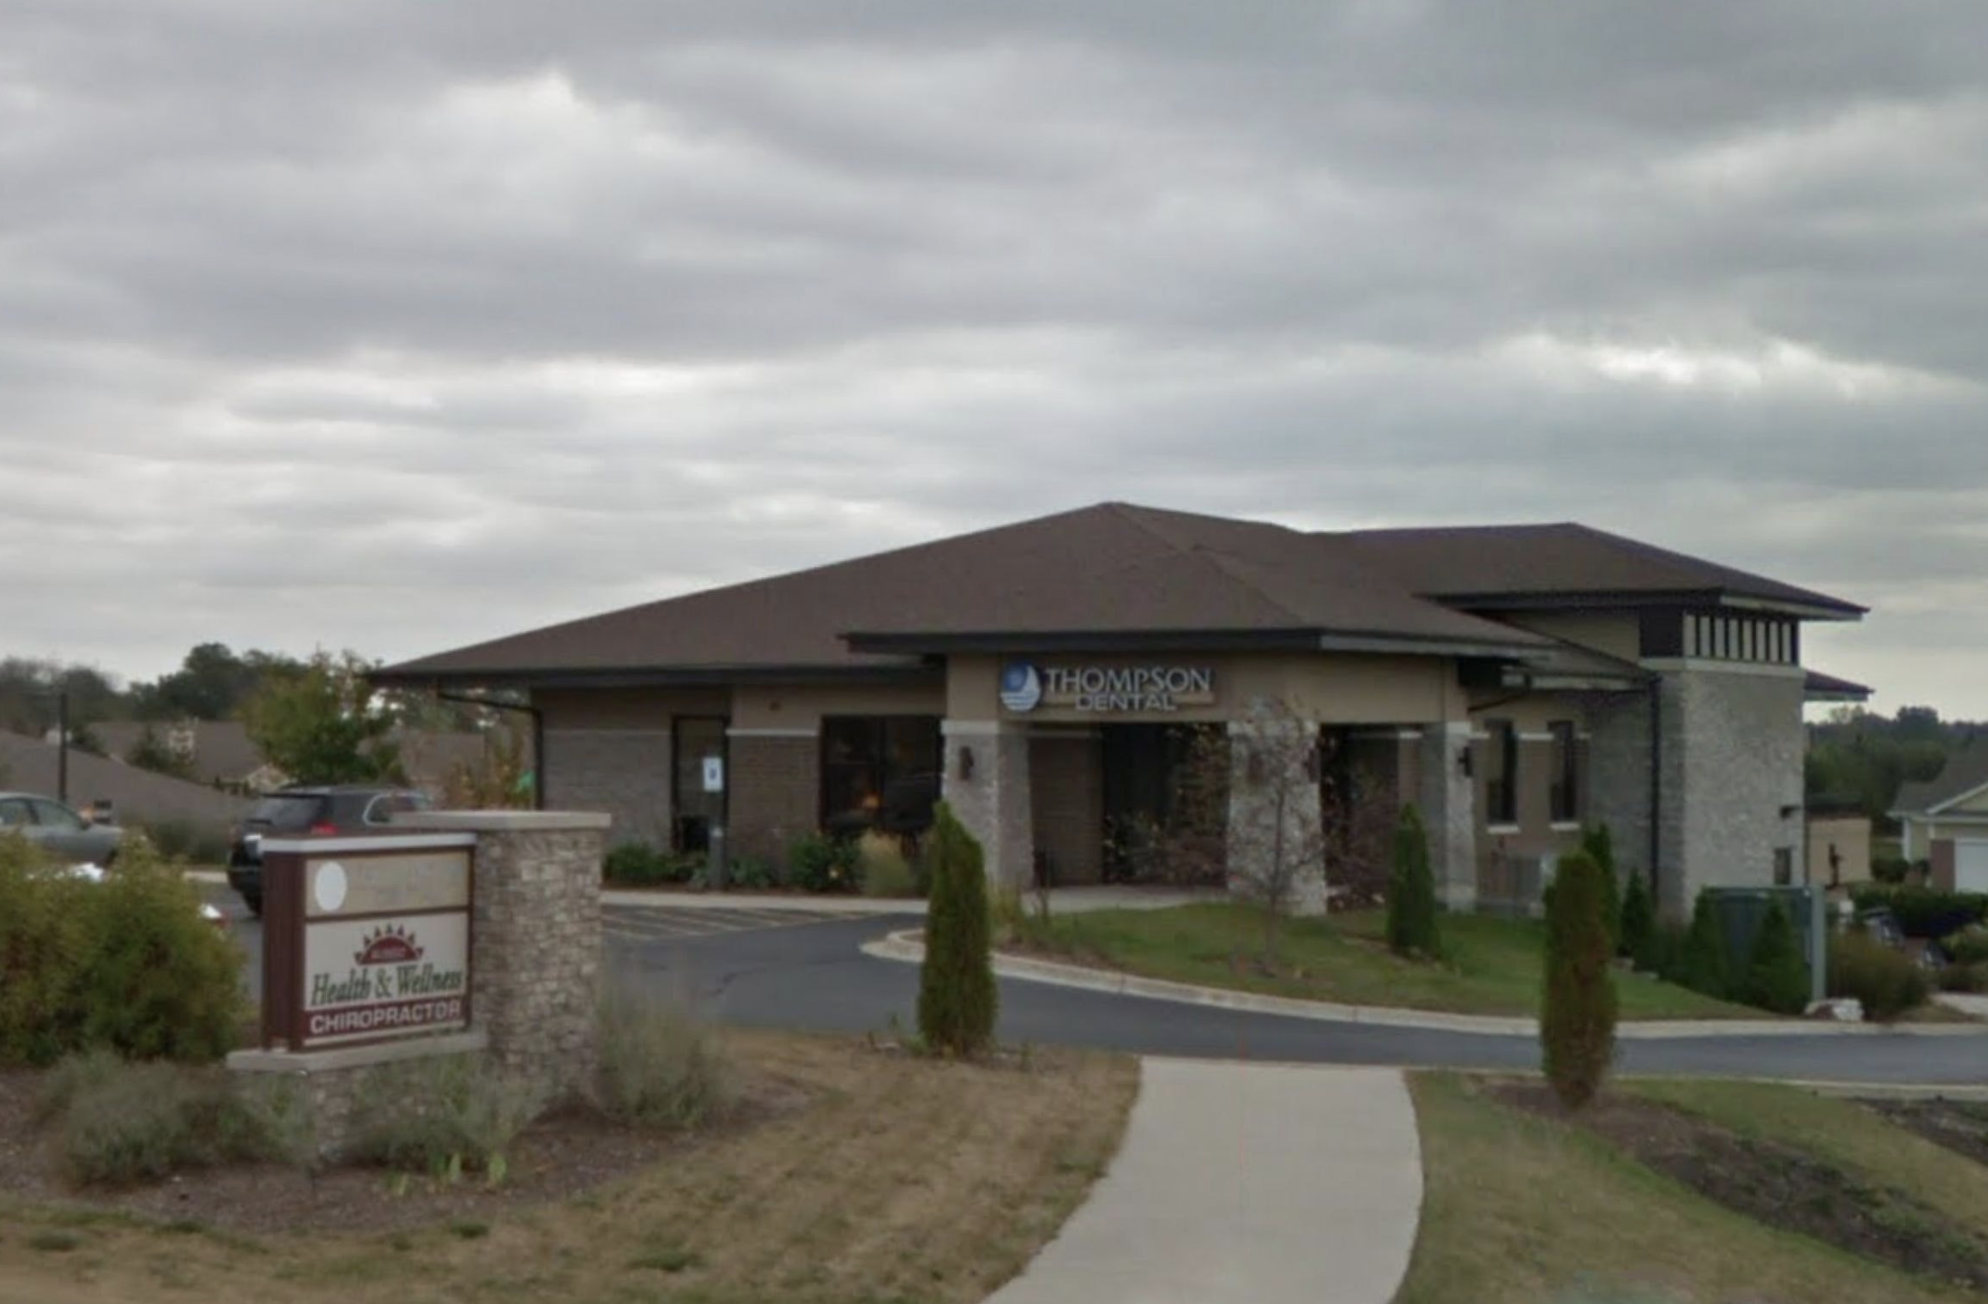 Exterior of Thompson Dental | Muskego, WI